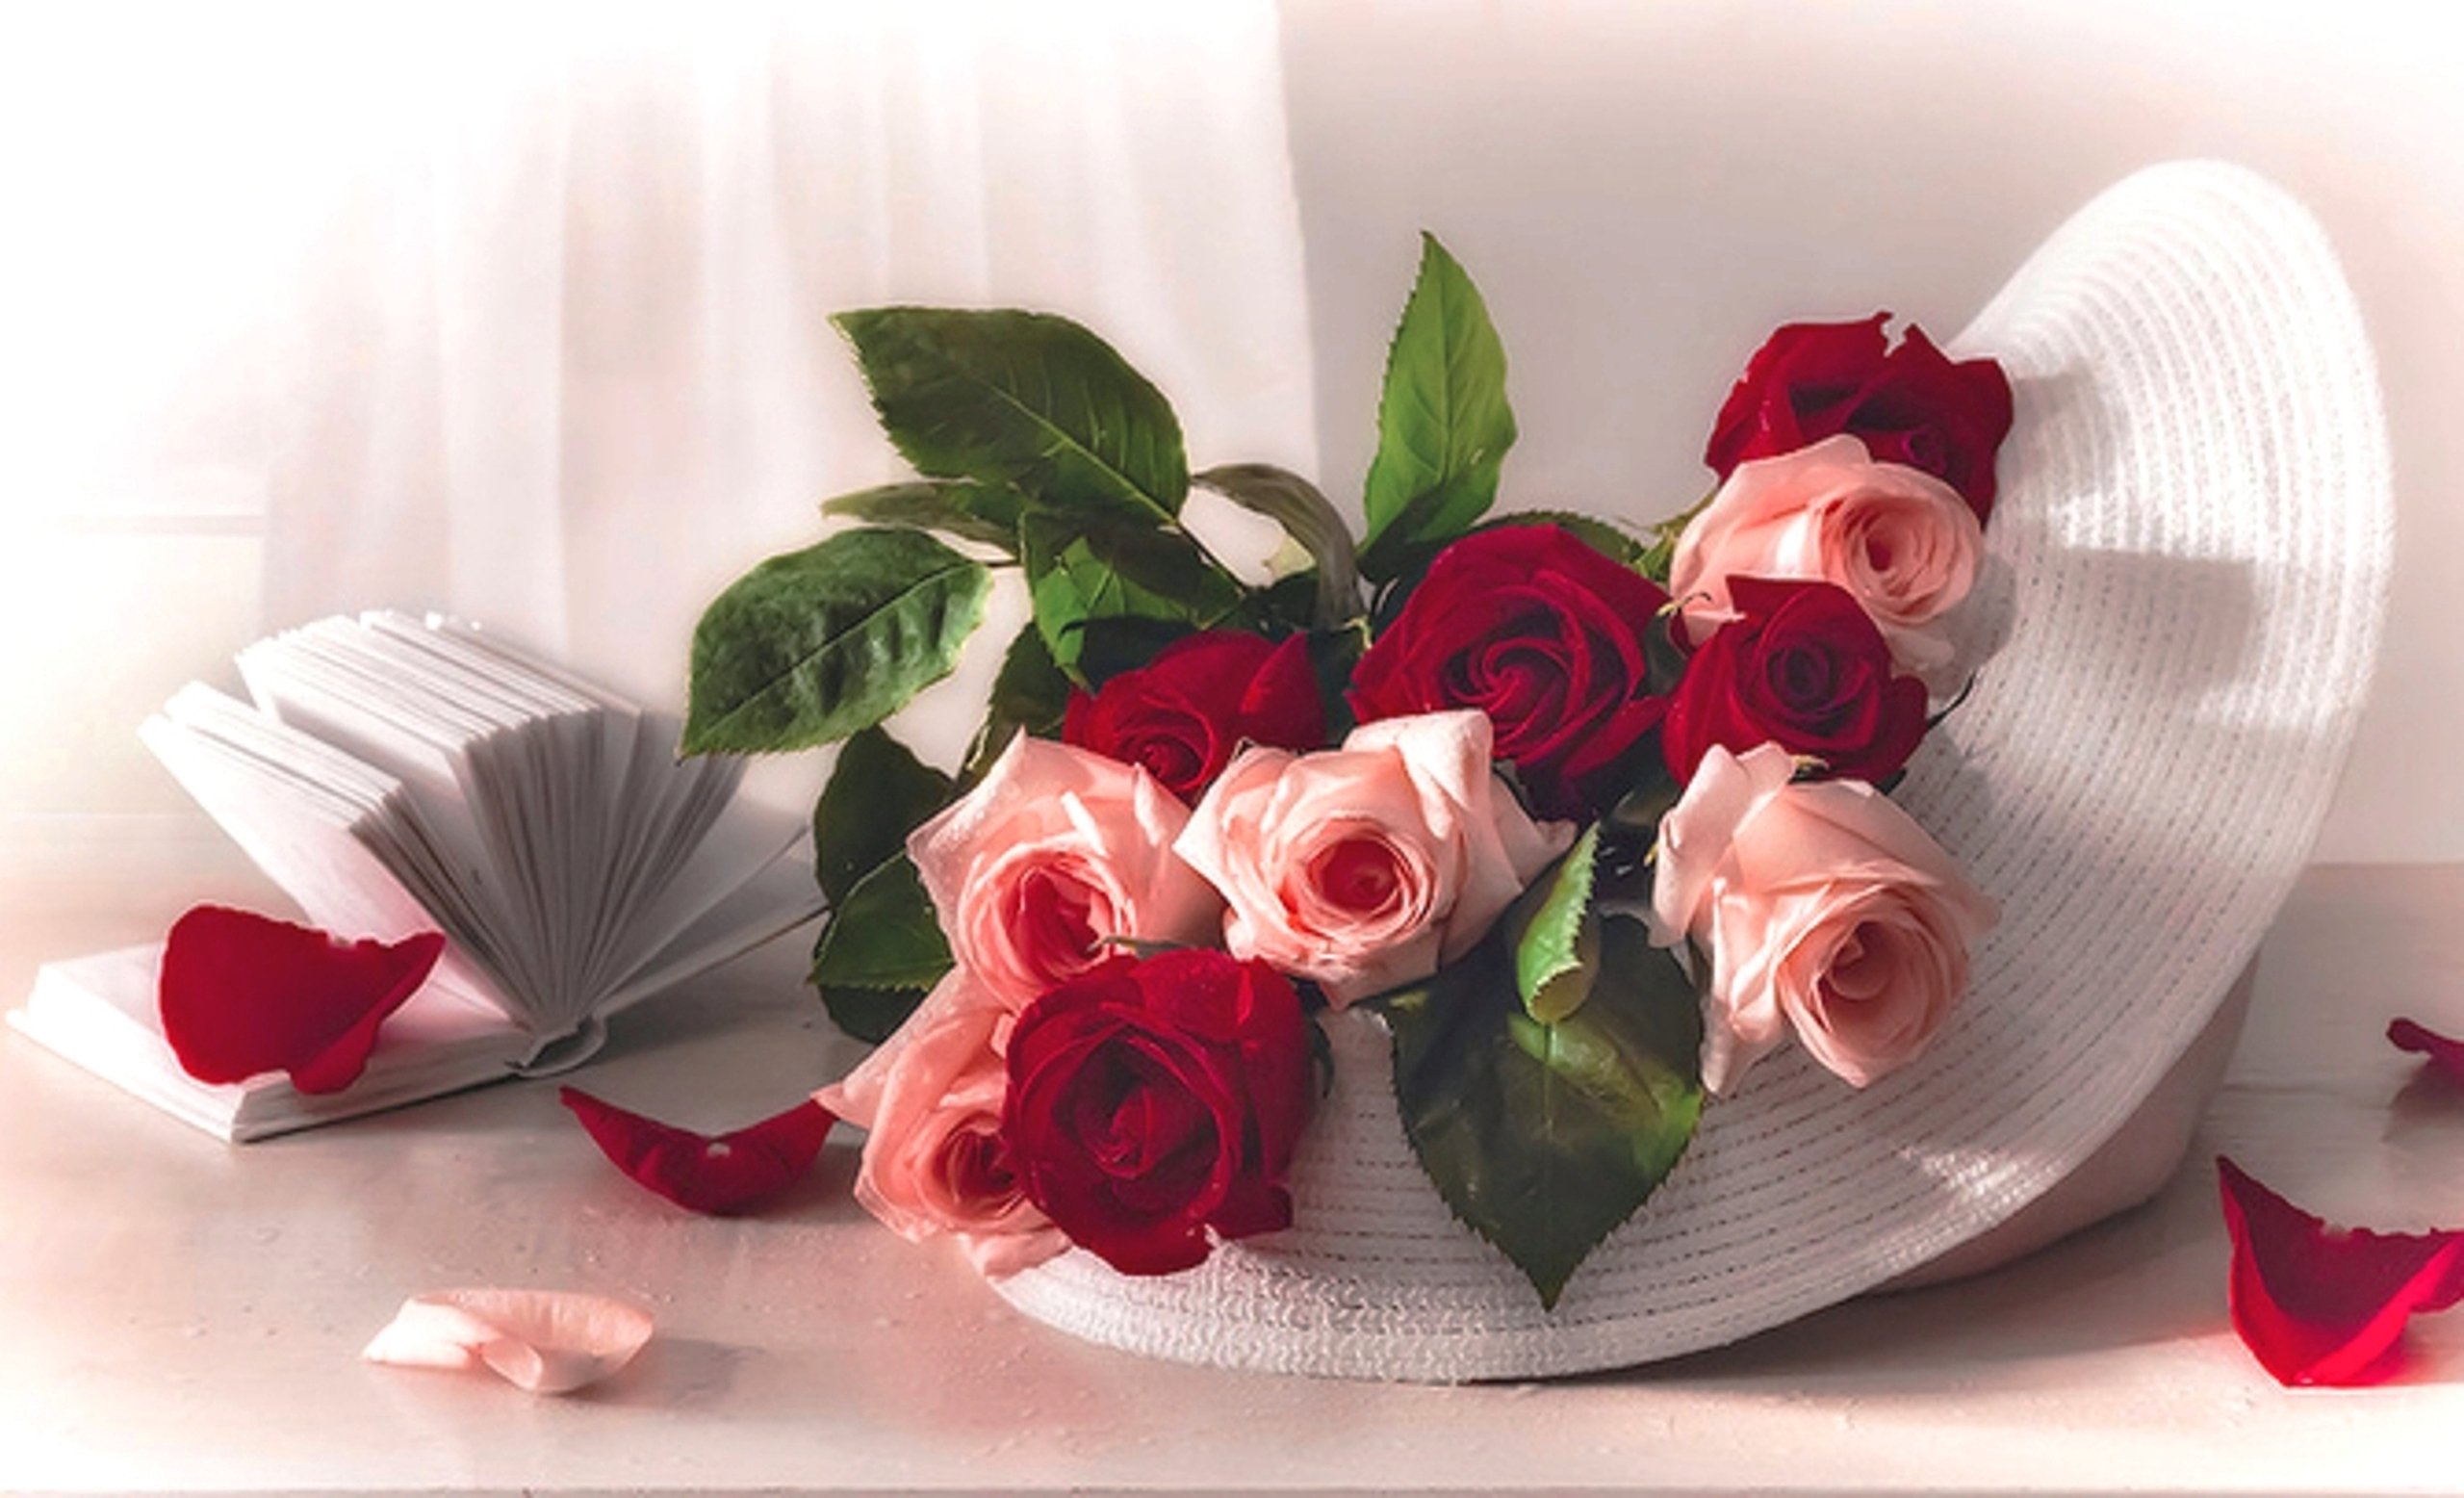 Romance Love Sun Still Life Summer Petals Beauty Delicate Red Soft Hat Floral Memories Beautiful White Flowers Gift Book Roses Nature Pink Last Natural Wallpapers Hd Desktop And Mobile Backgrounds,Best White Paint Colors For Walls Australia